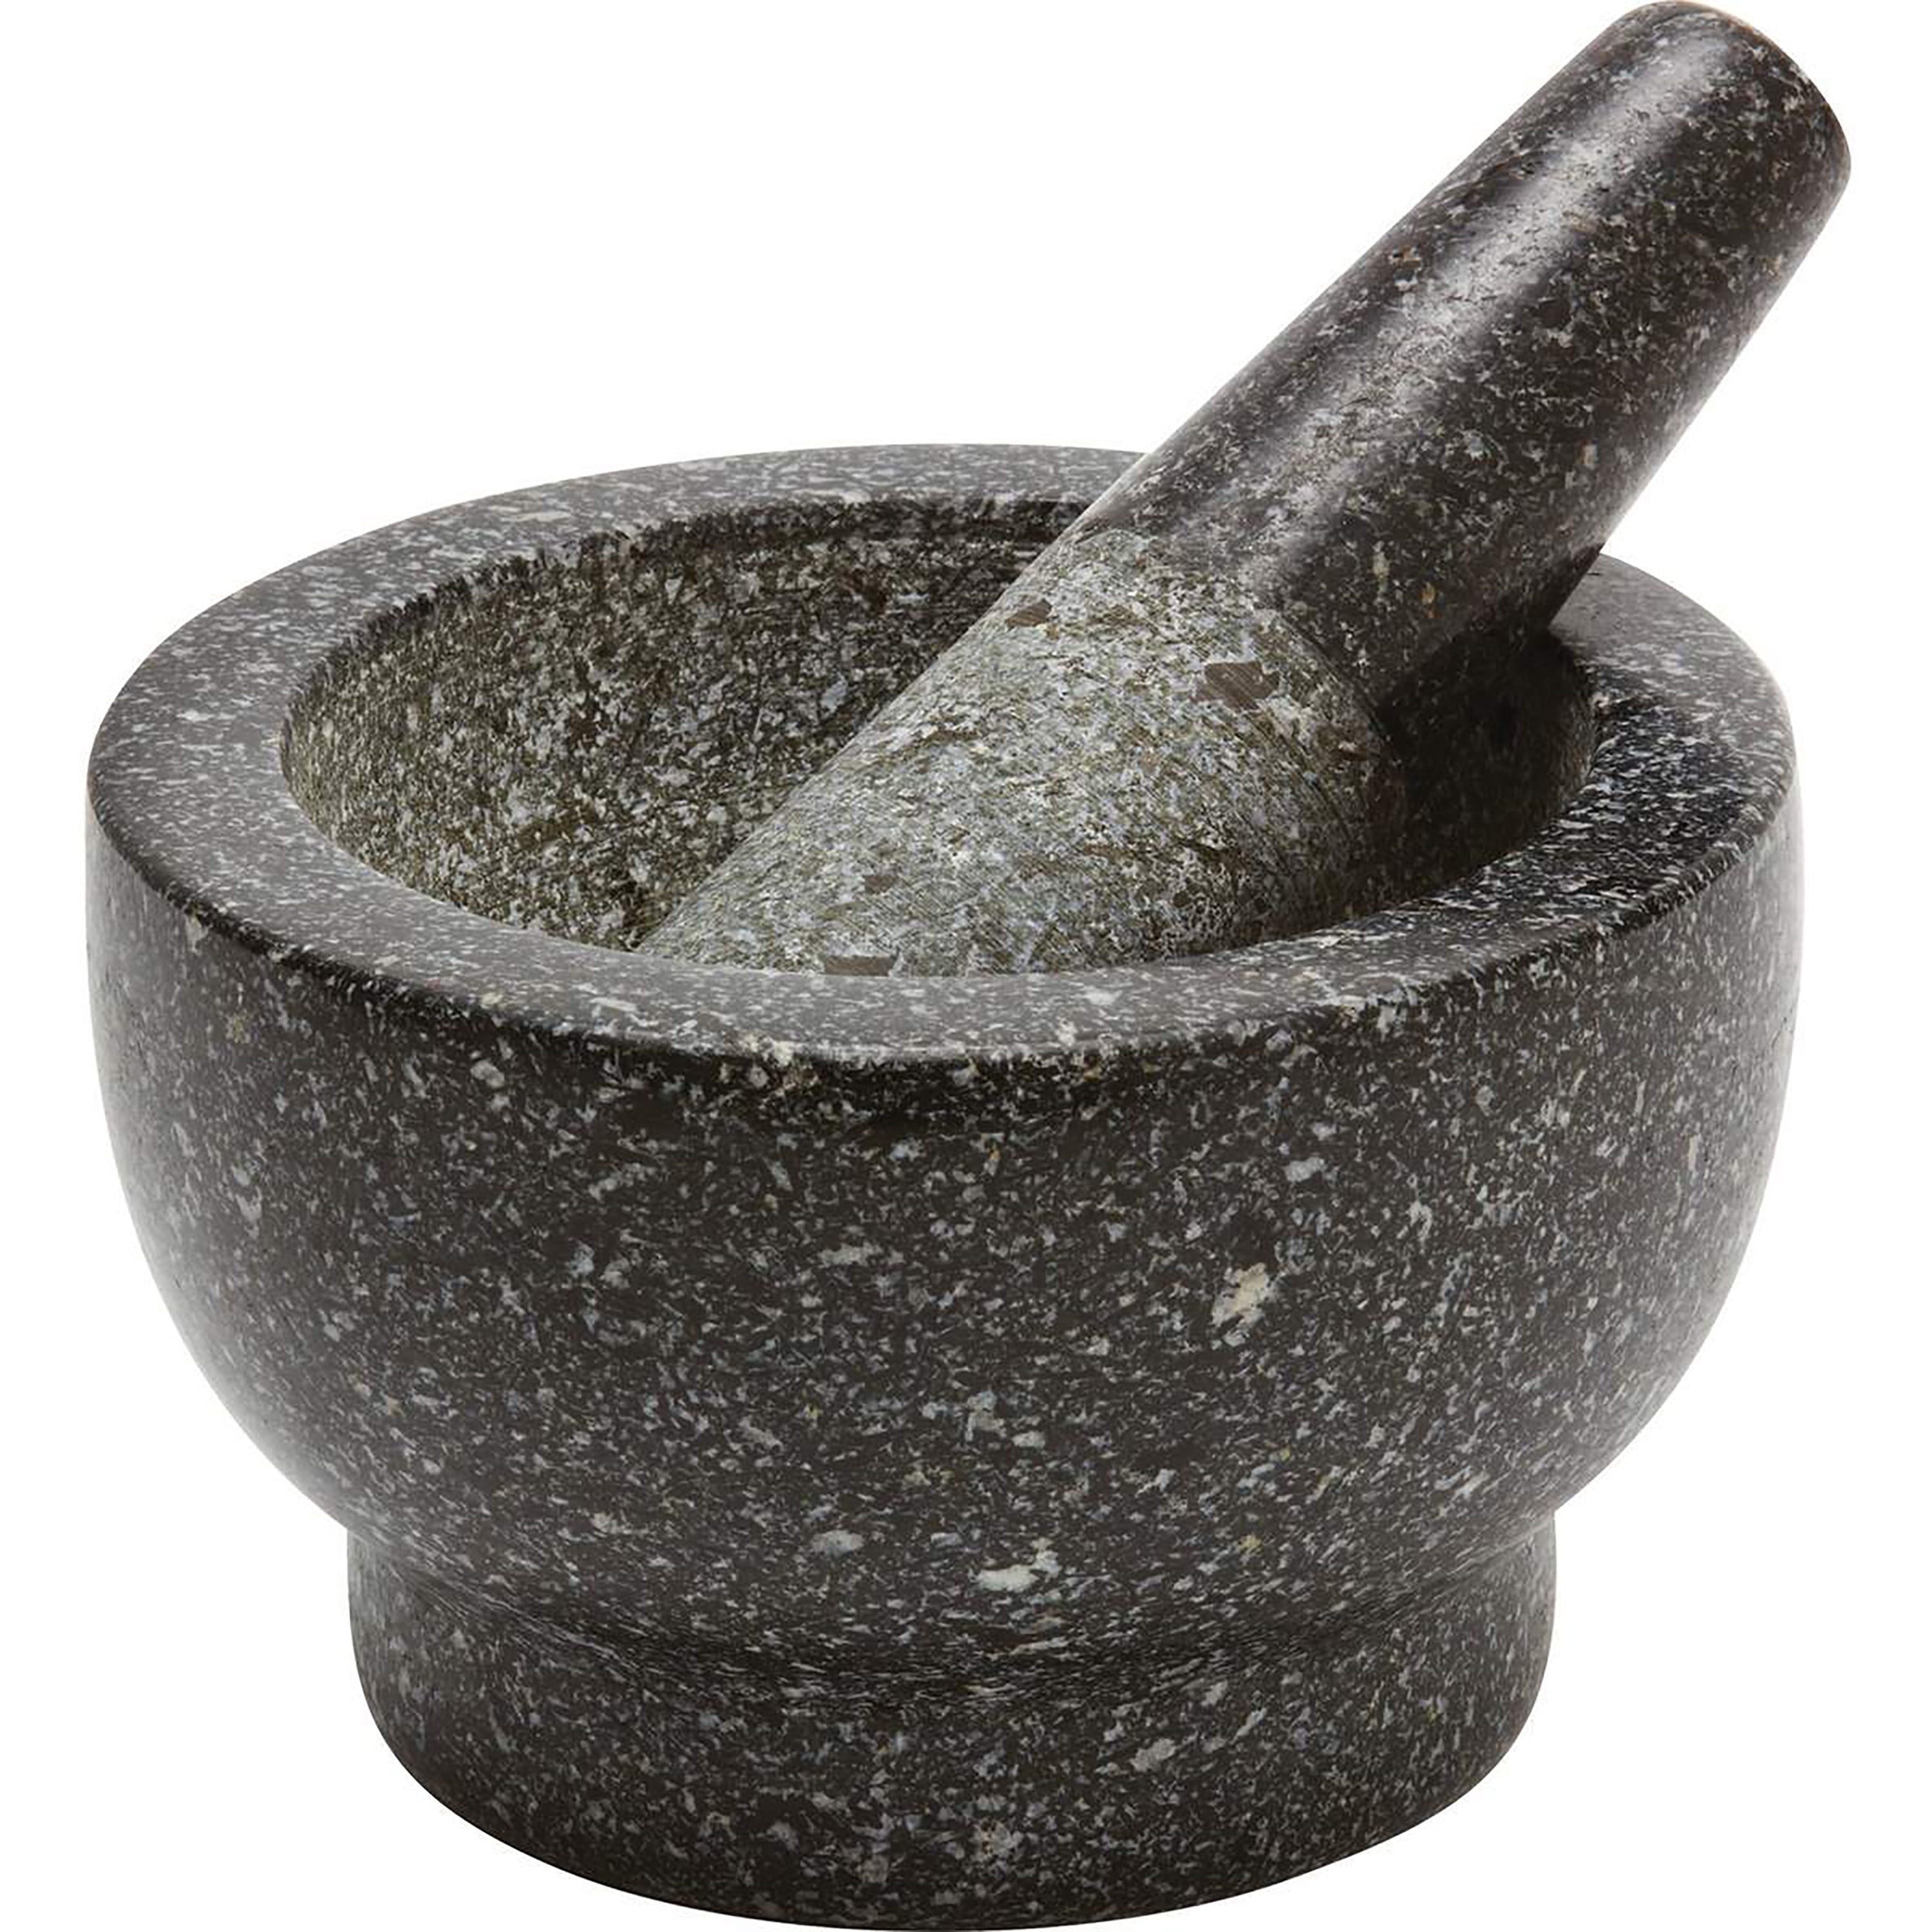 HealthSmart 4-piece Granite Molcajete Set a Stylish Yet Durable Mortar & Pestle with 2 Spice Containers 